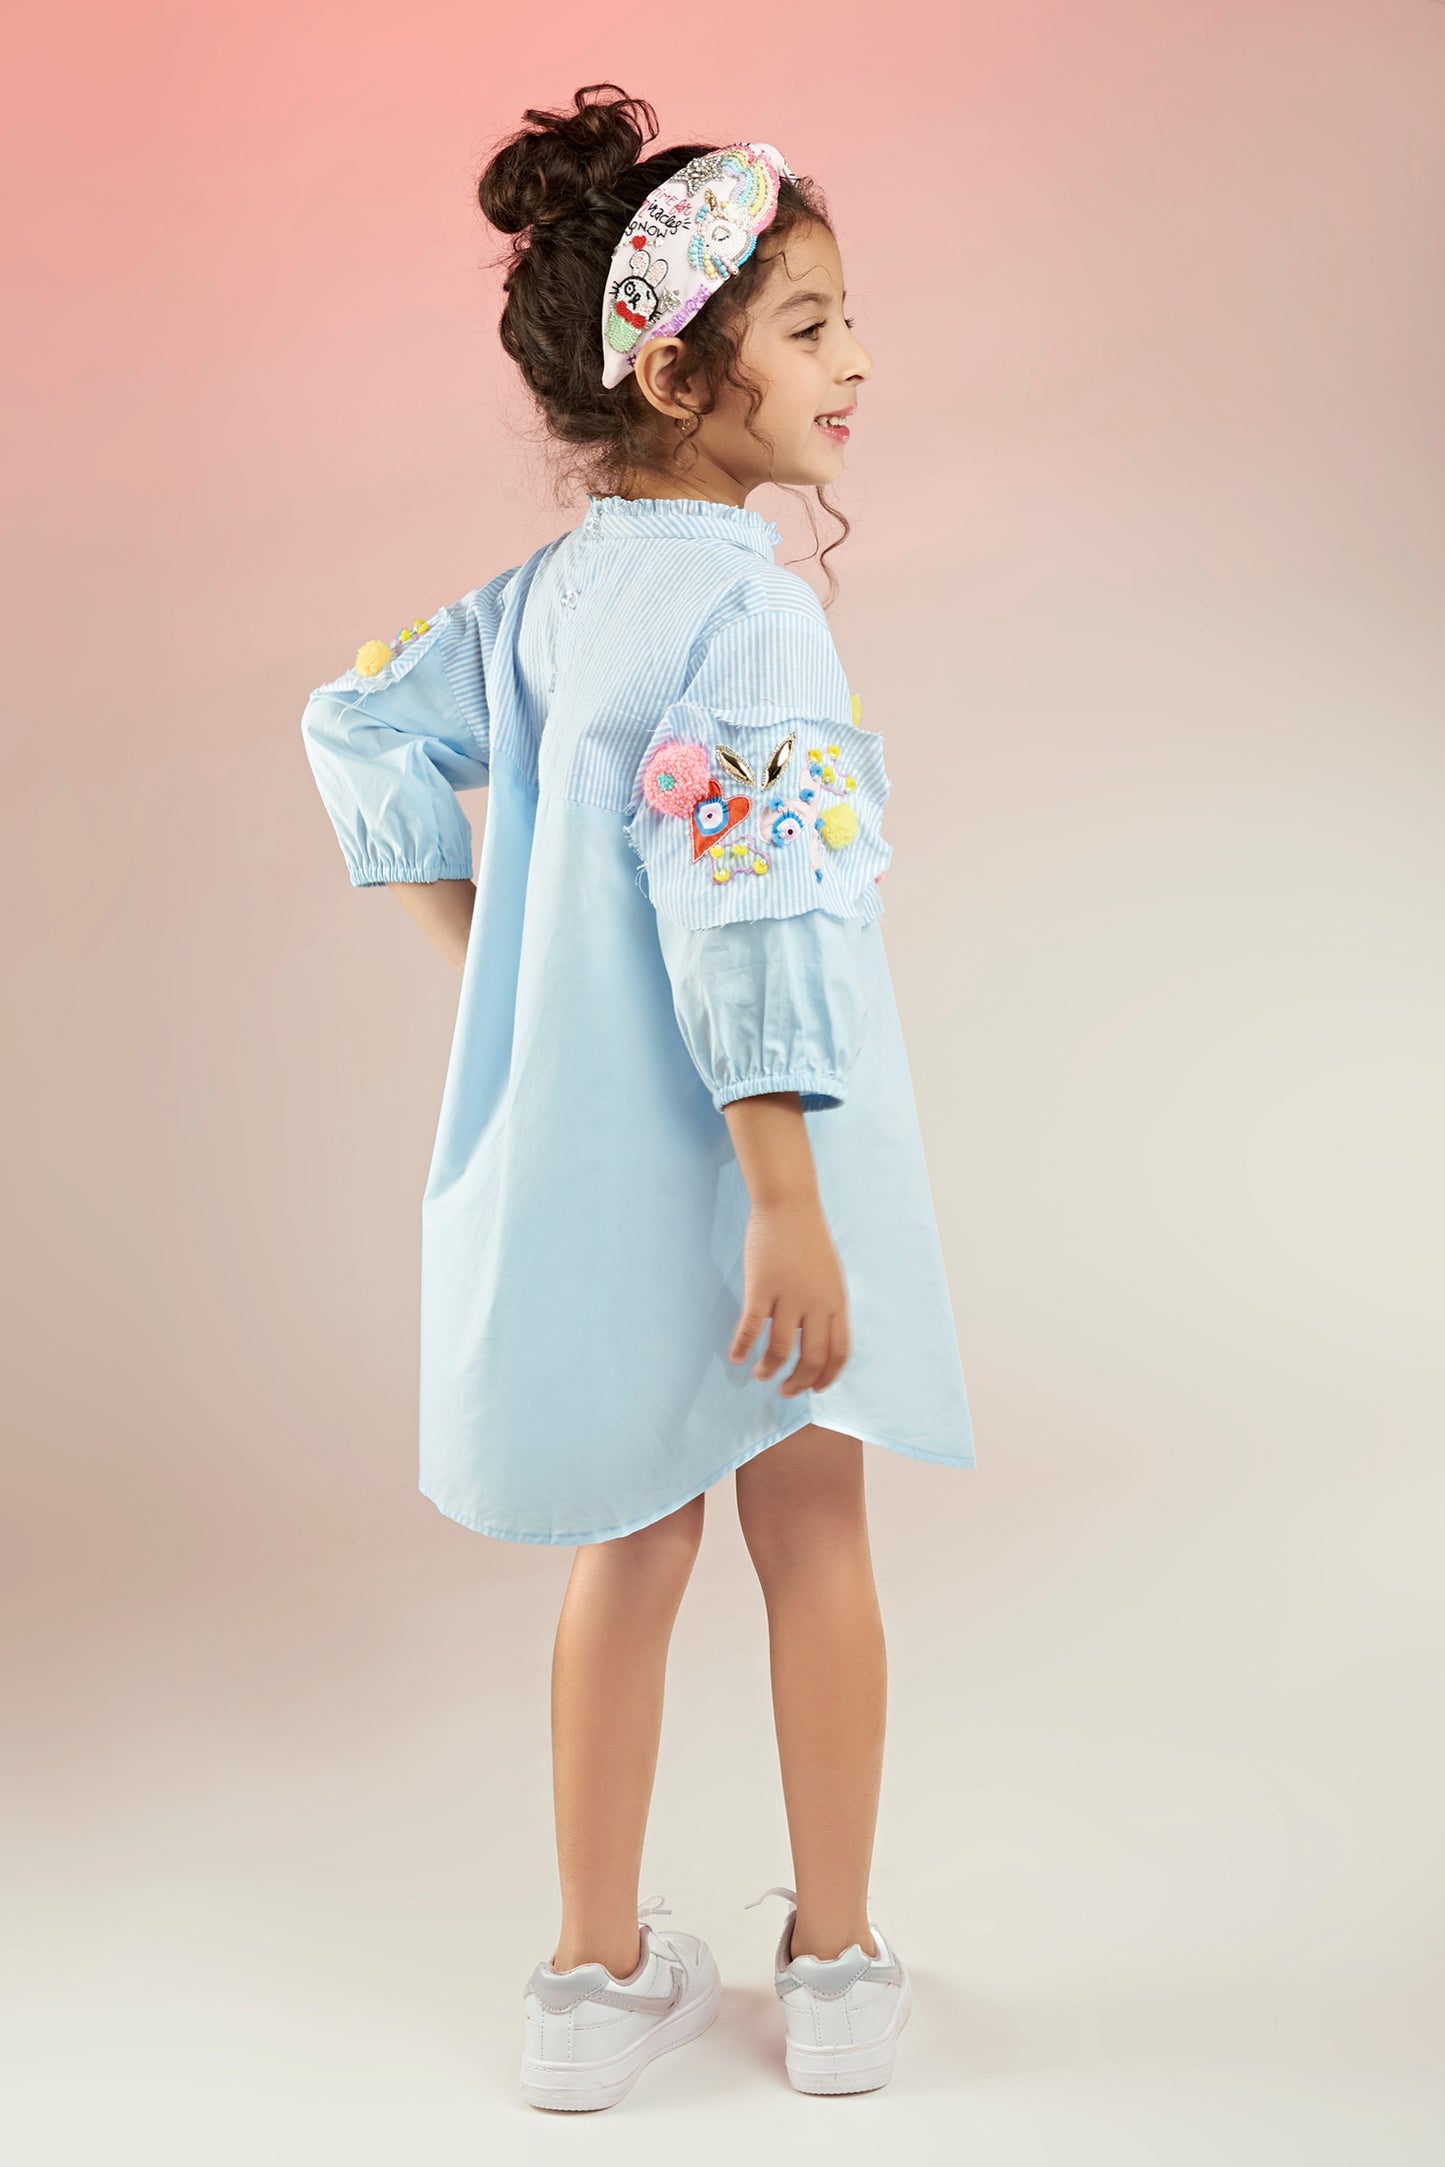 Fly High Embroidered Dress Mini For Kids - (Joey & Pooh)